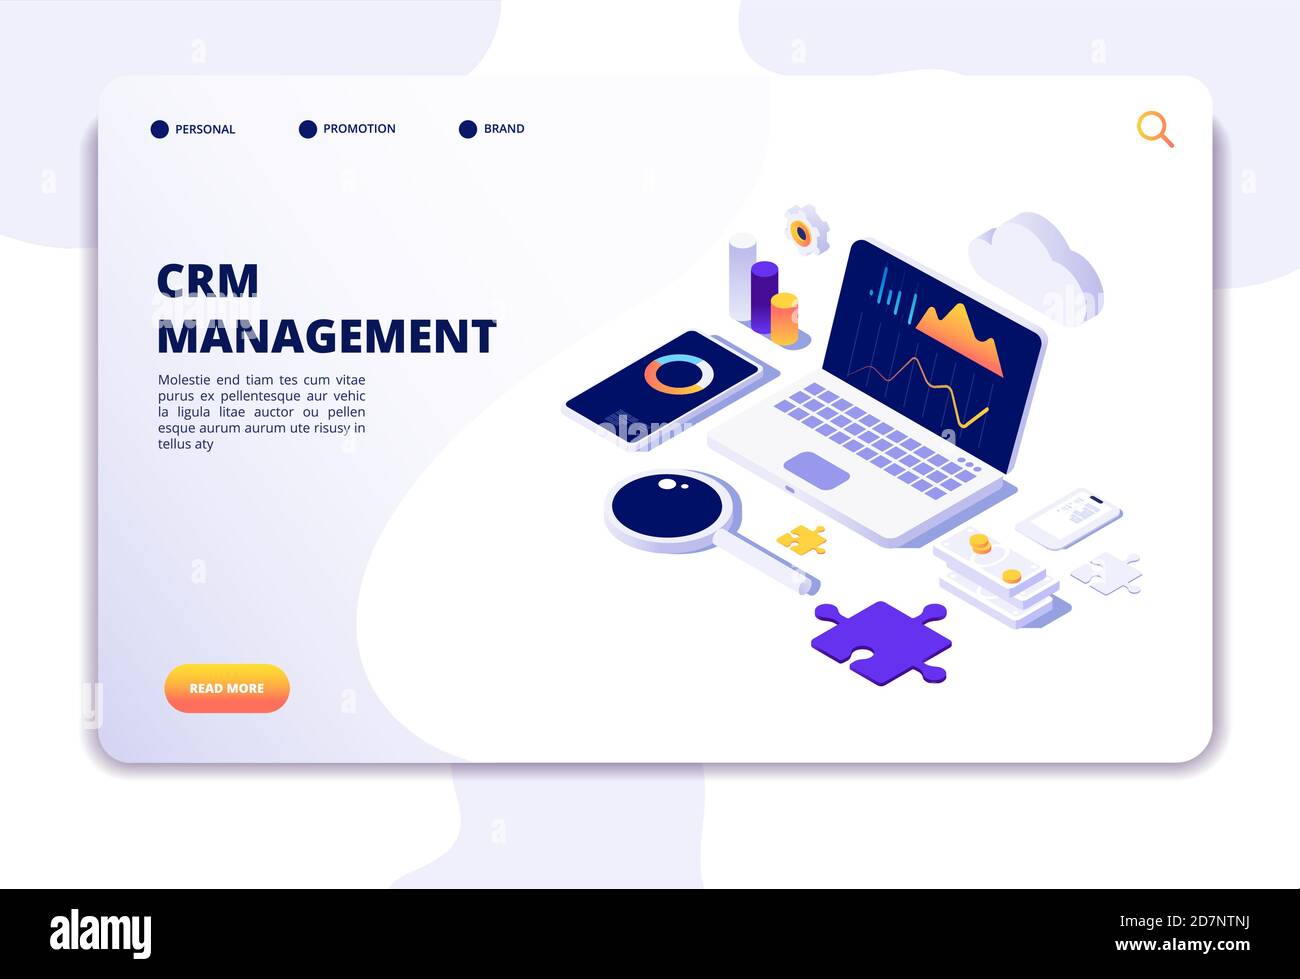 Crm concept. Customer relationship management. Database web system solution. Isometric landing page. Illustration of crm management, strategy market, analysis promotion Stock Vector